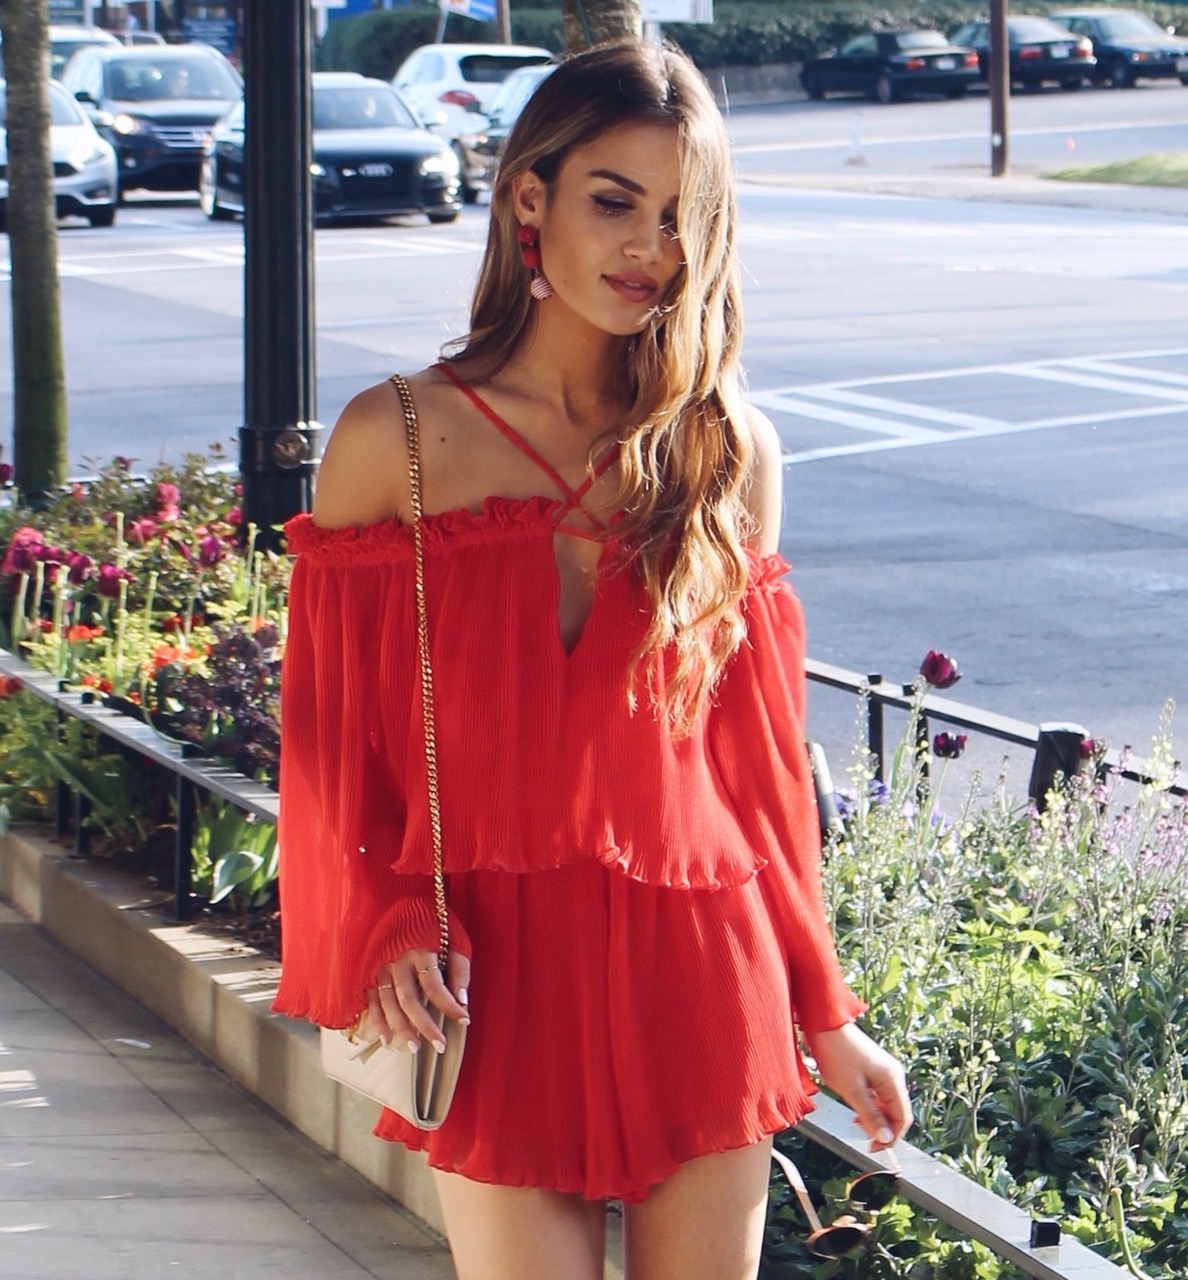 Evanne Lucas: Red Romper ChaCha